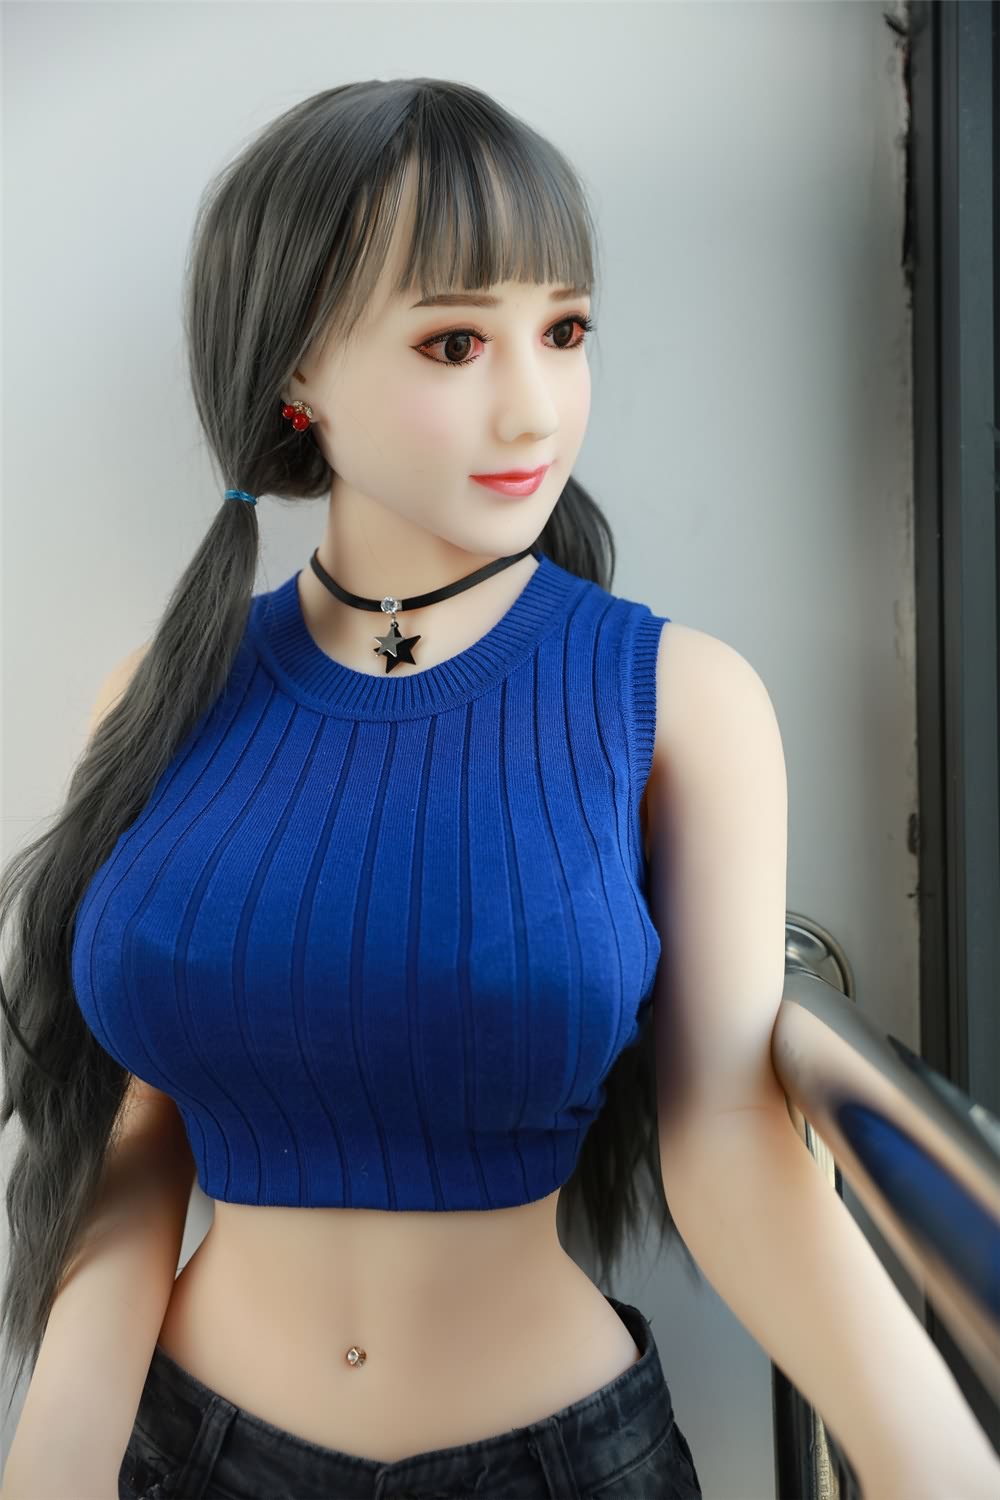 150cm Cheap Sex Doll Torso Adult Silicone Big Ass Breast Boobs Chest Sex Doll